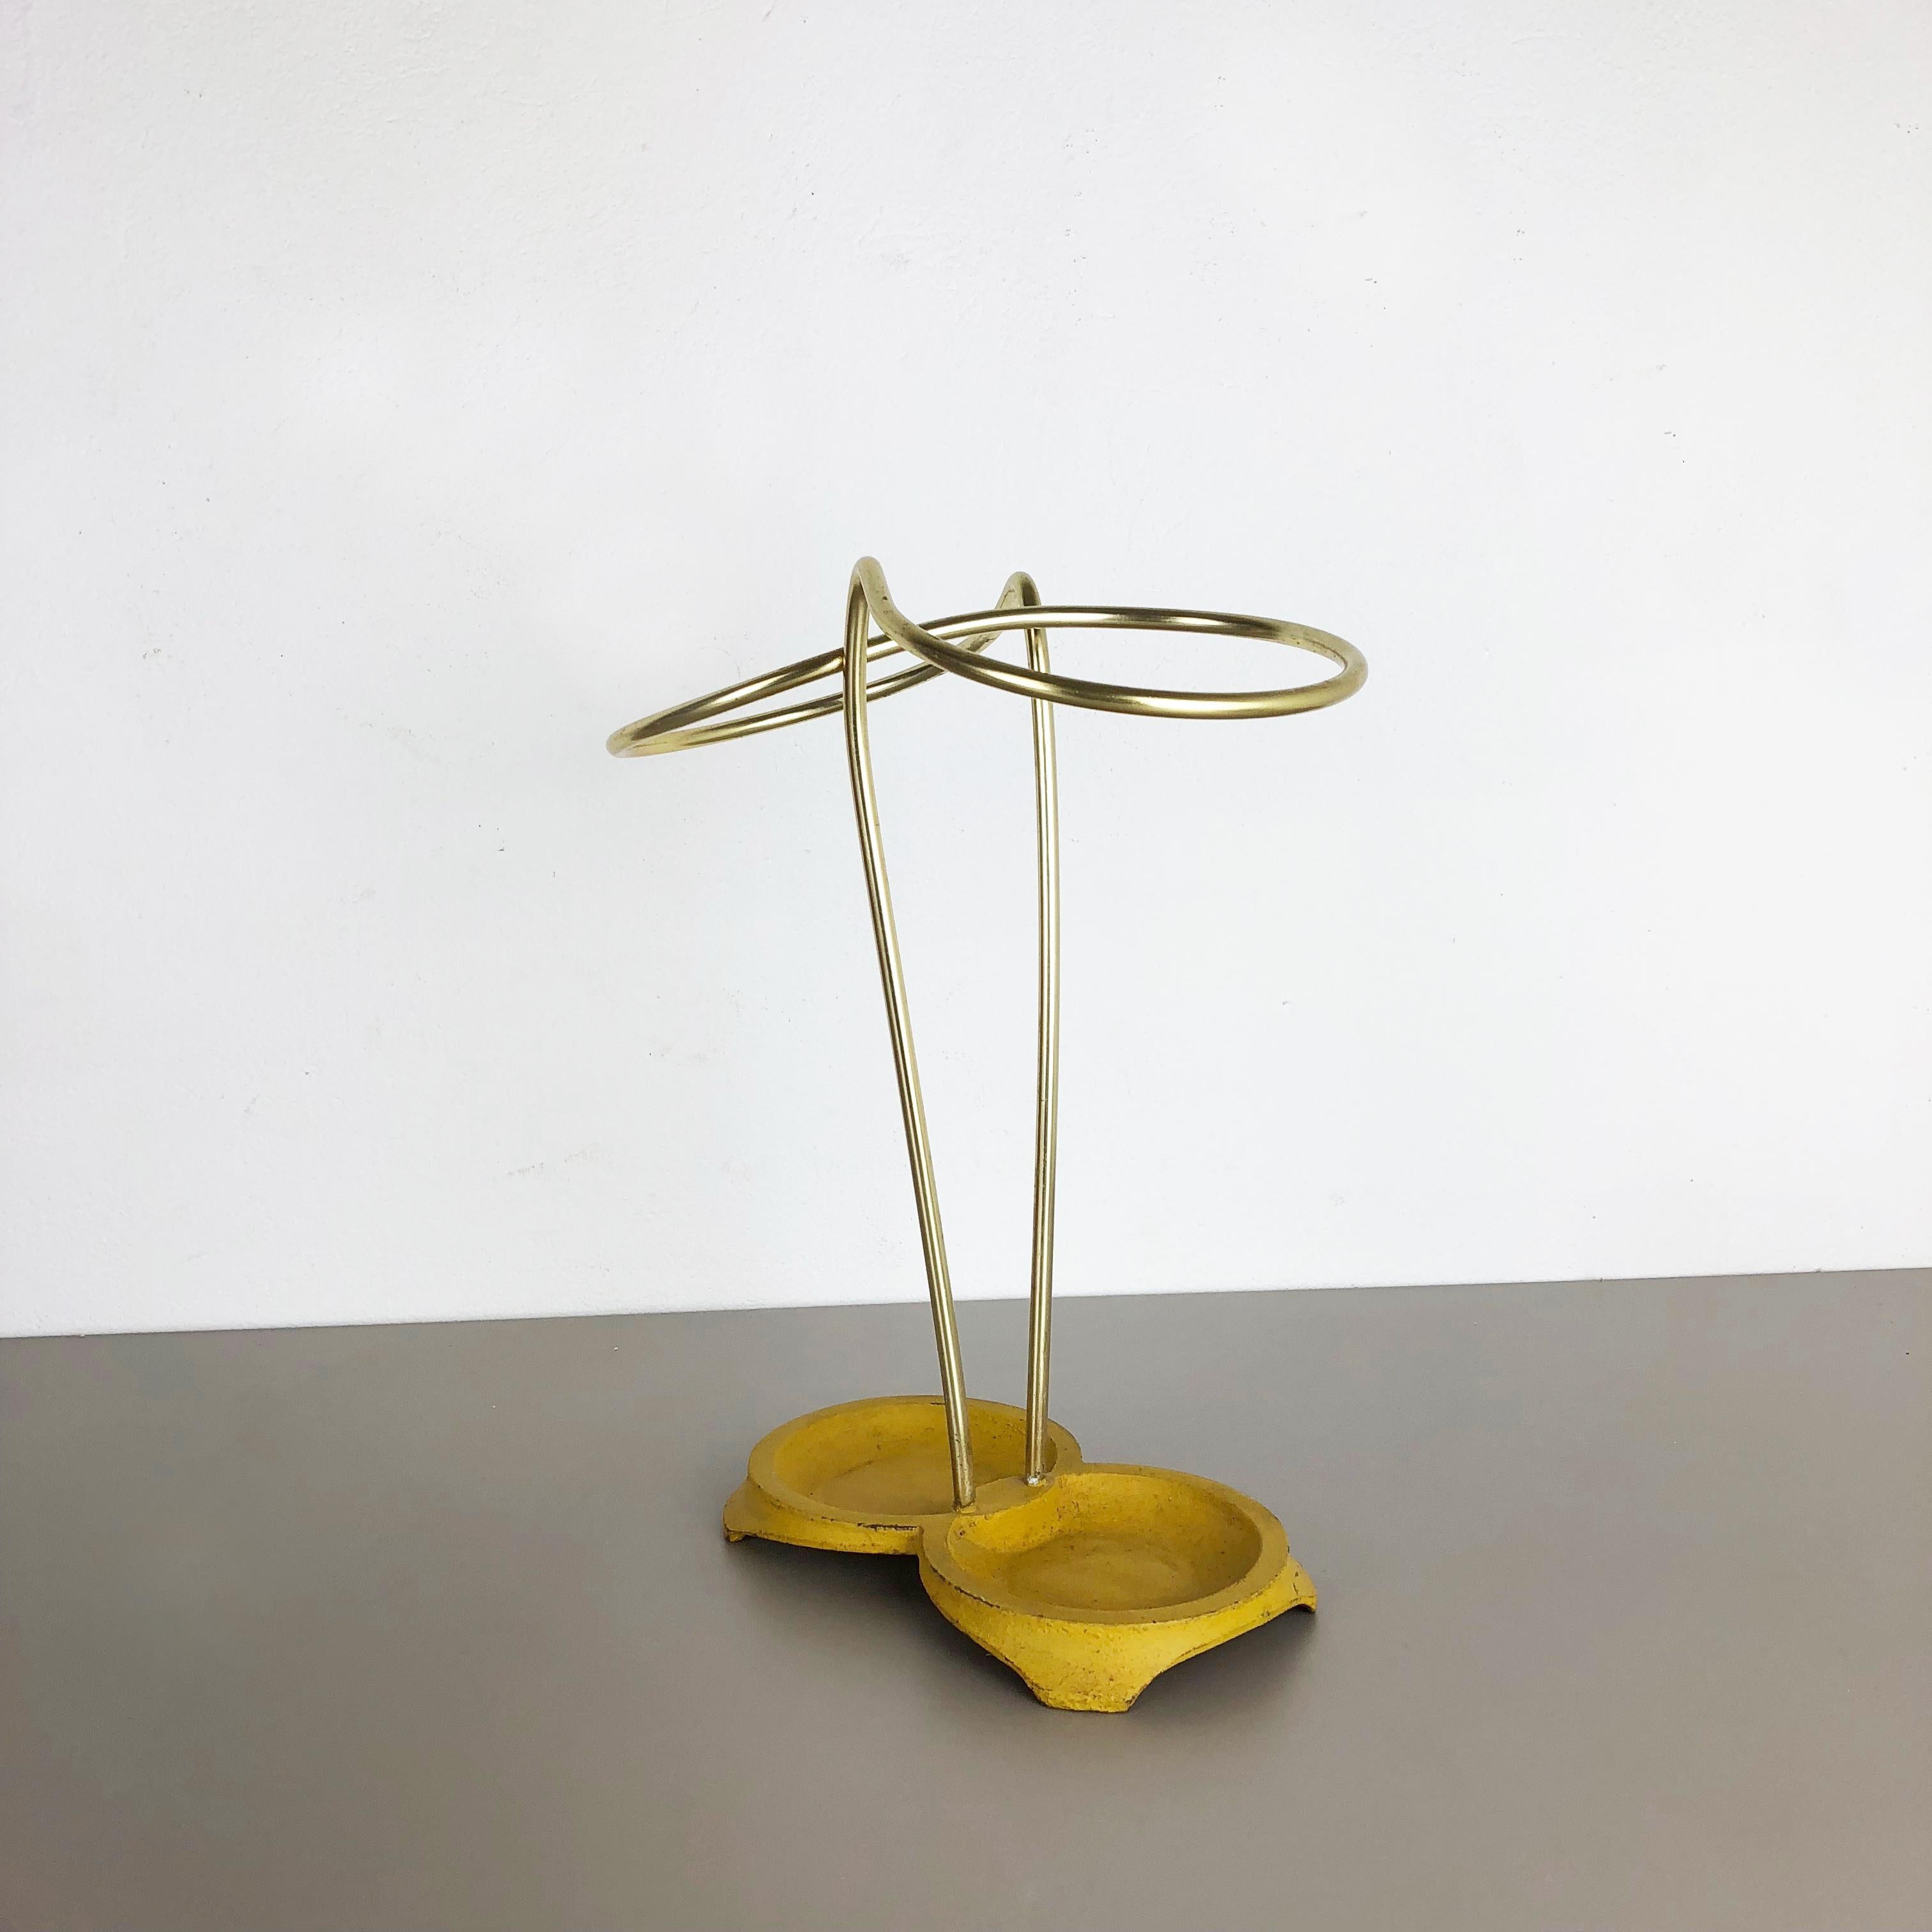 Article:

Bauhaus umbrella stand


Origin:

Germany


Age:

1950s


This original vintage Bauhaus style umbrella stand was produced in the 1950s in Germany. The brass colored top elements is made of aluminum, the heavy metal base